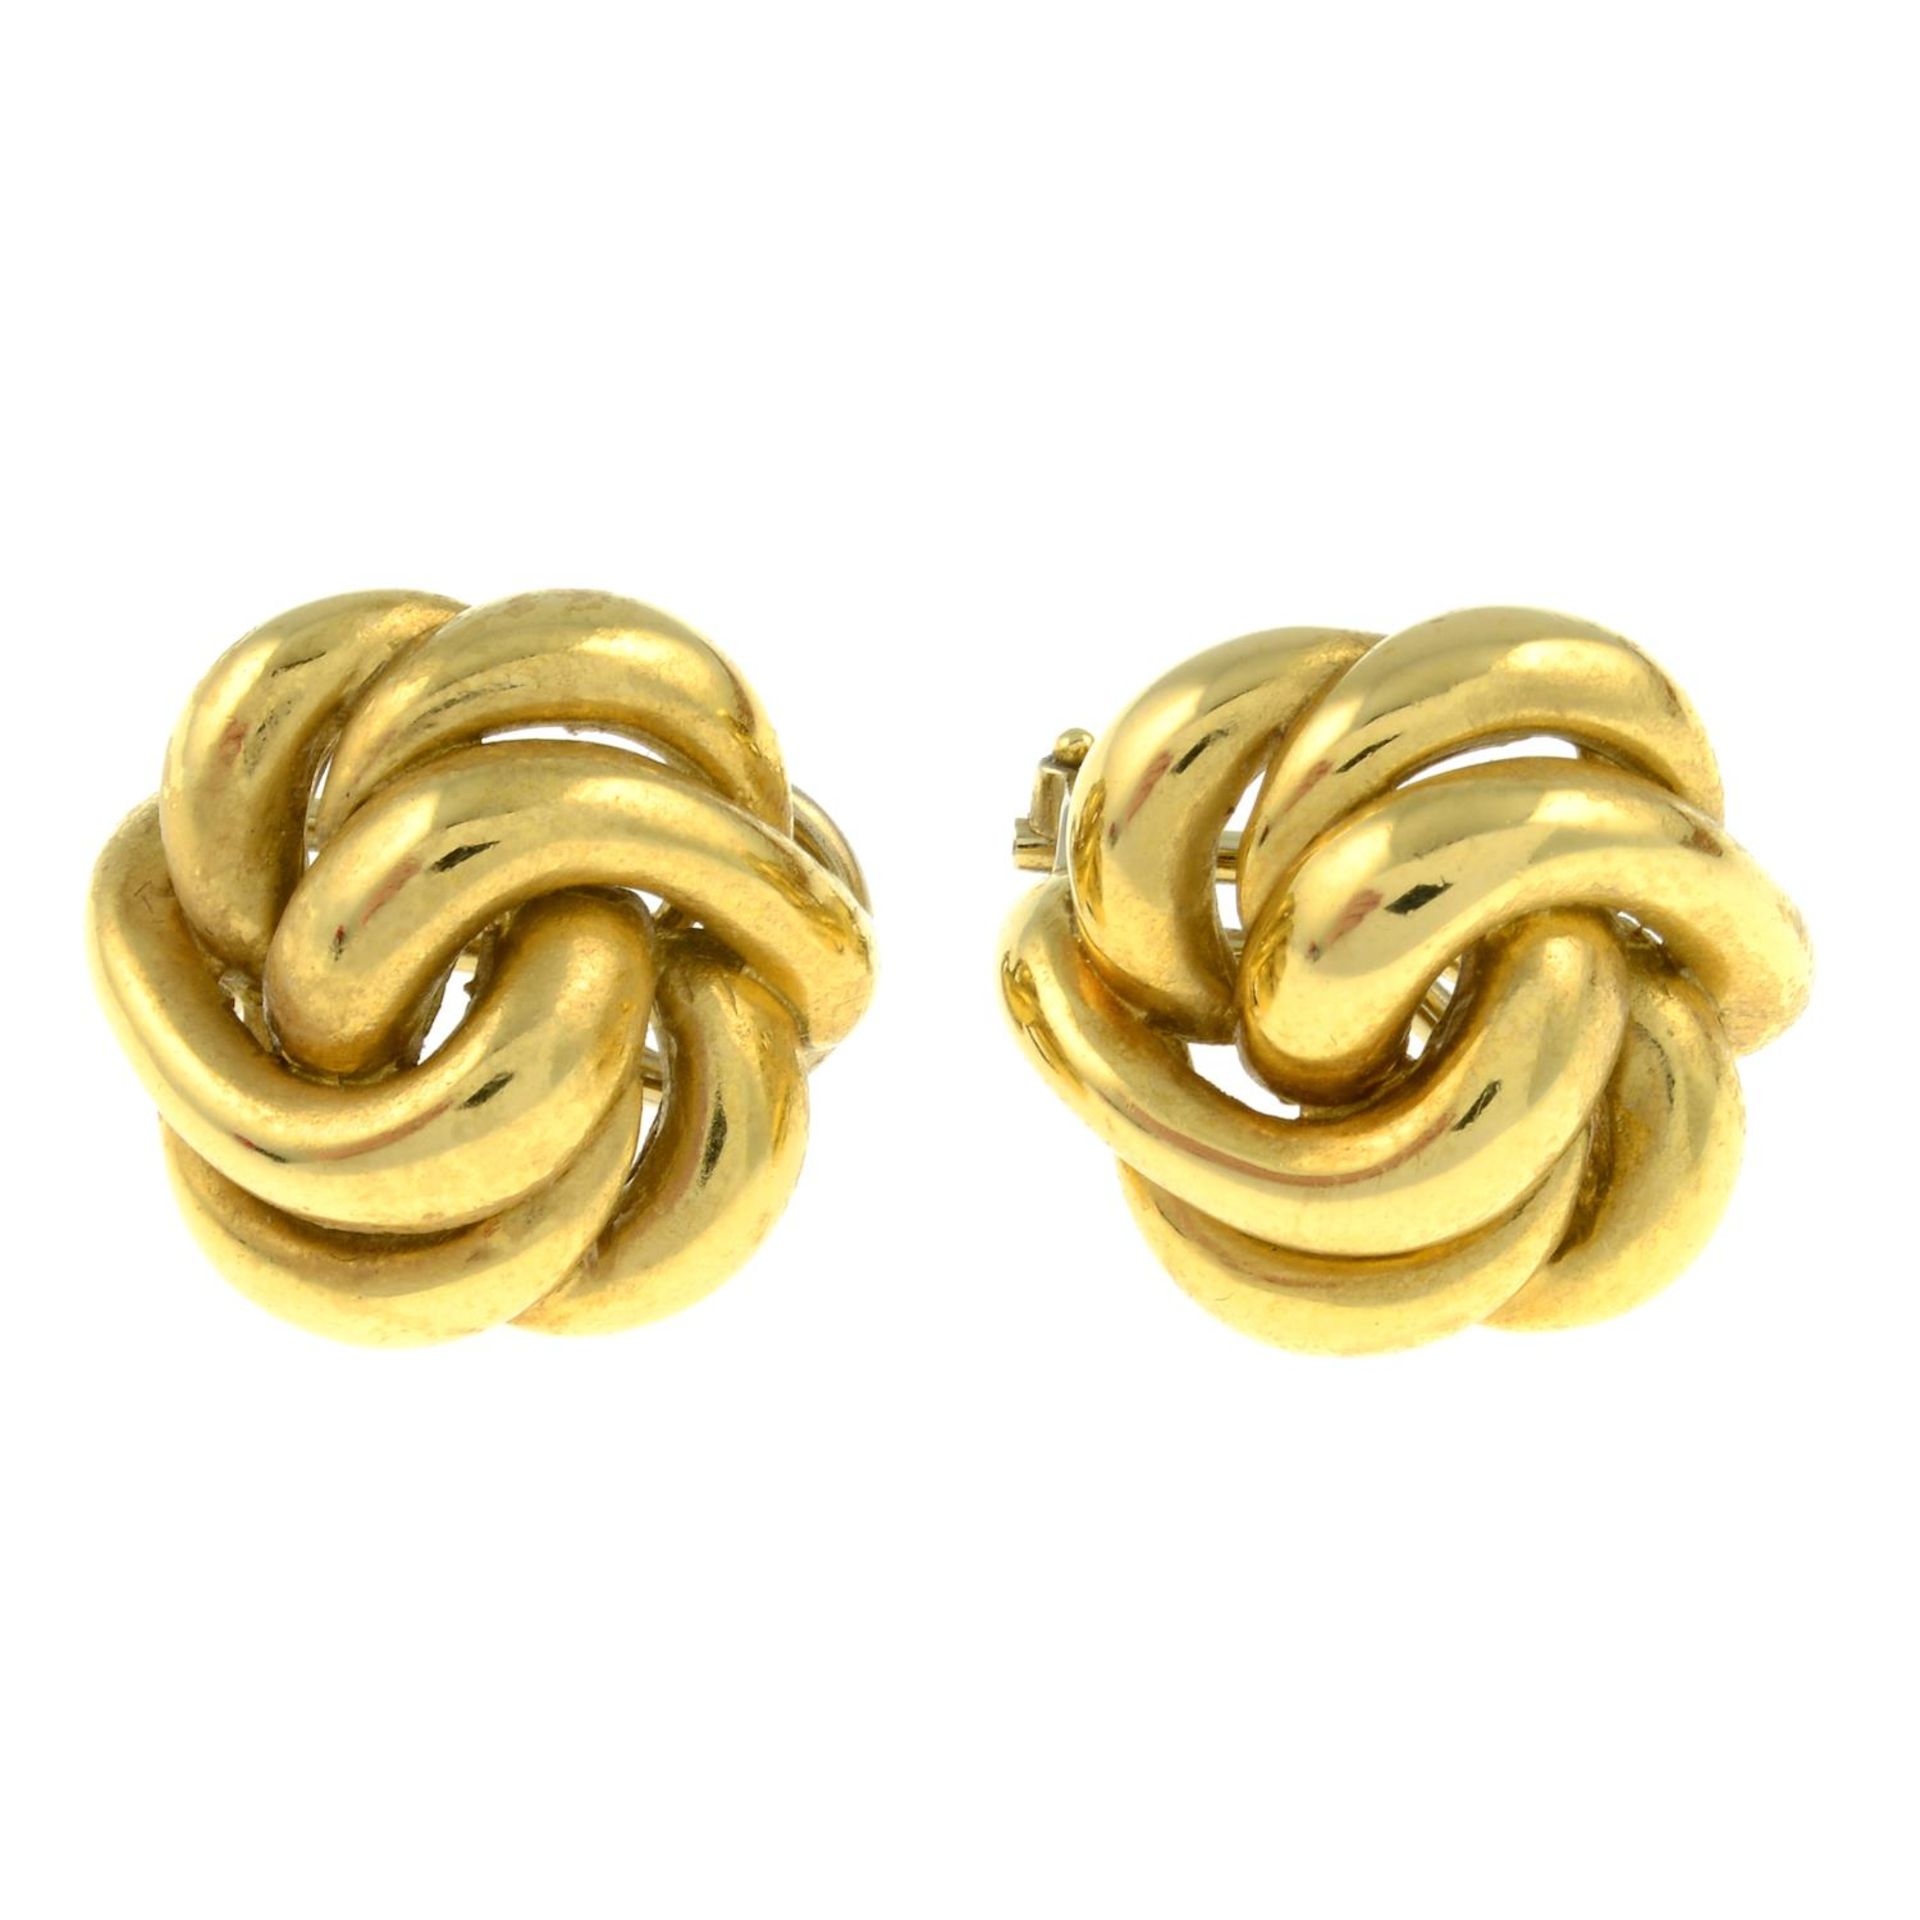 A pair of 18ct gold knot earrings.Import marks for Sheffield, 1990.Length 2cms.